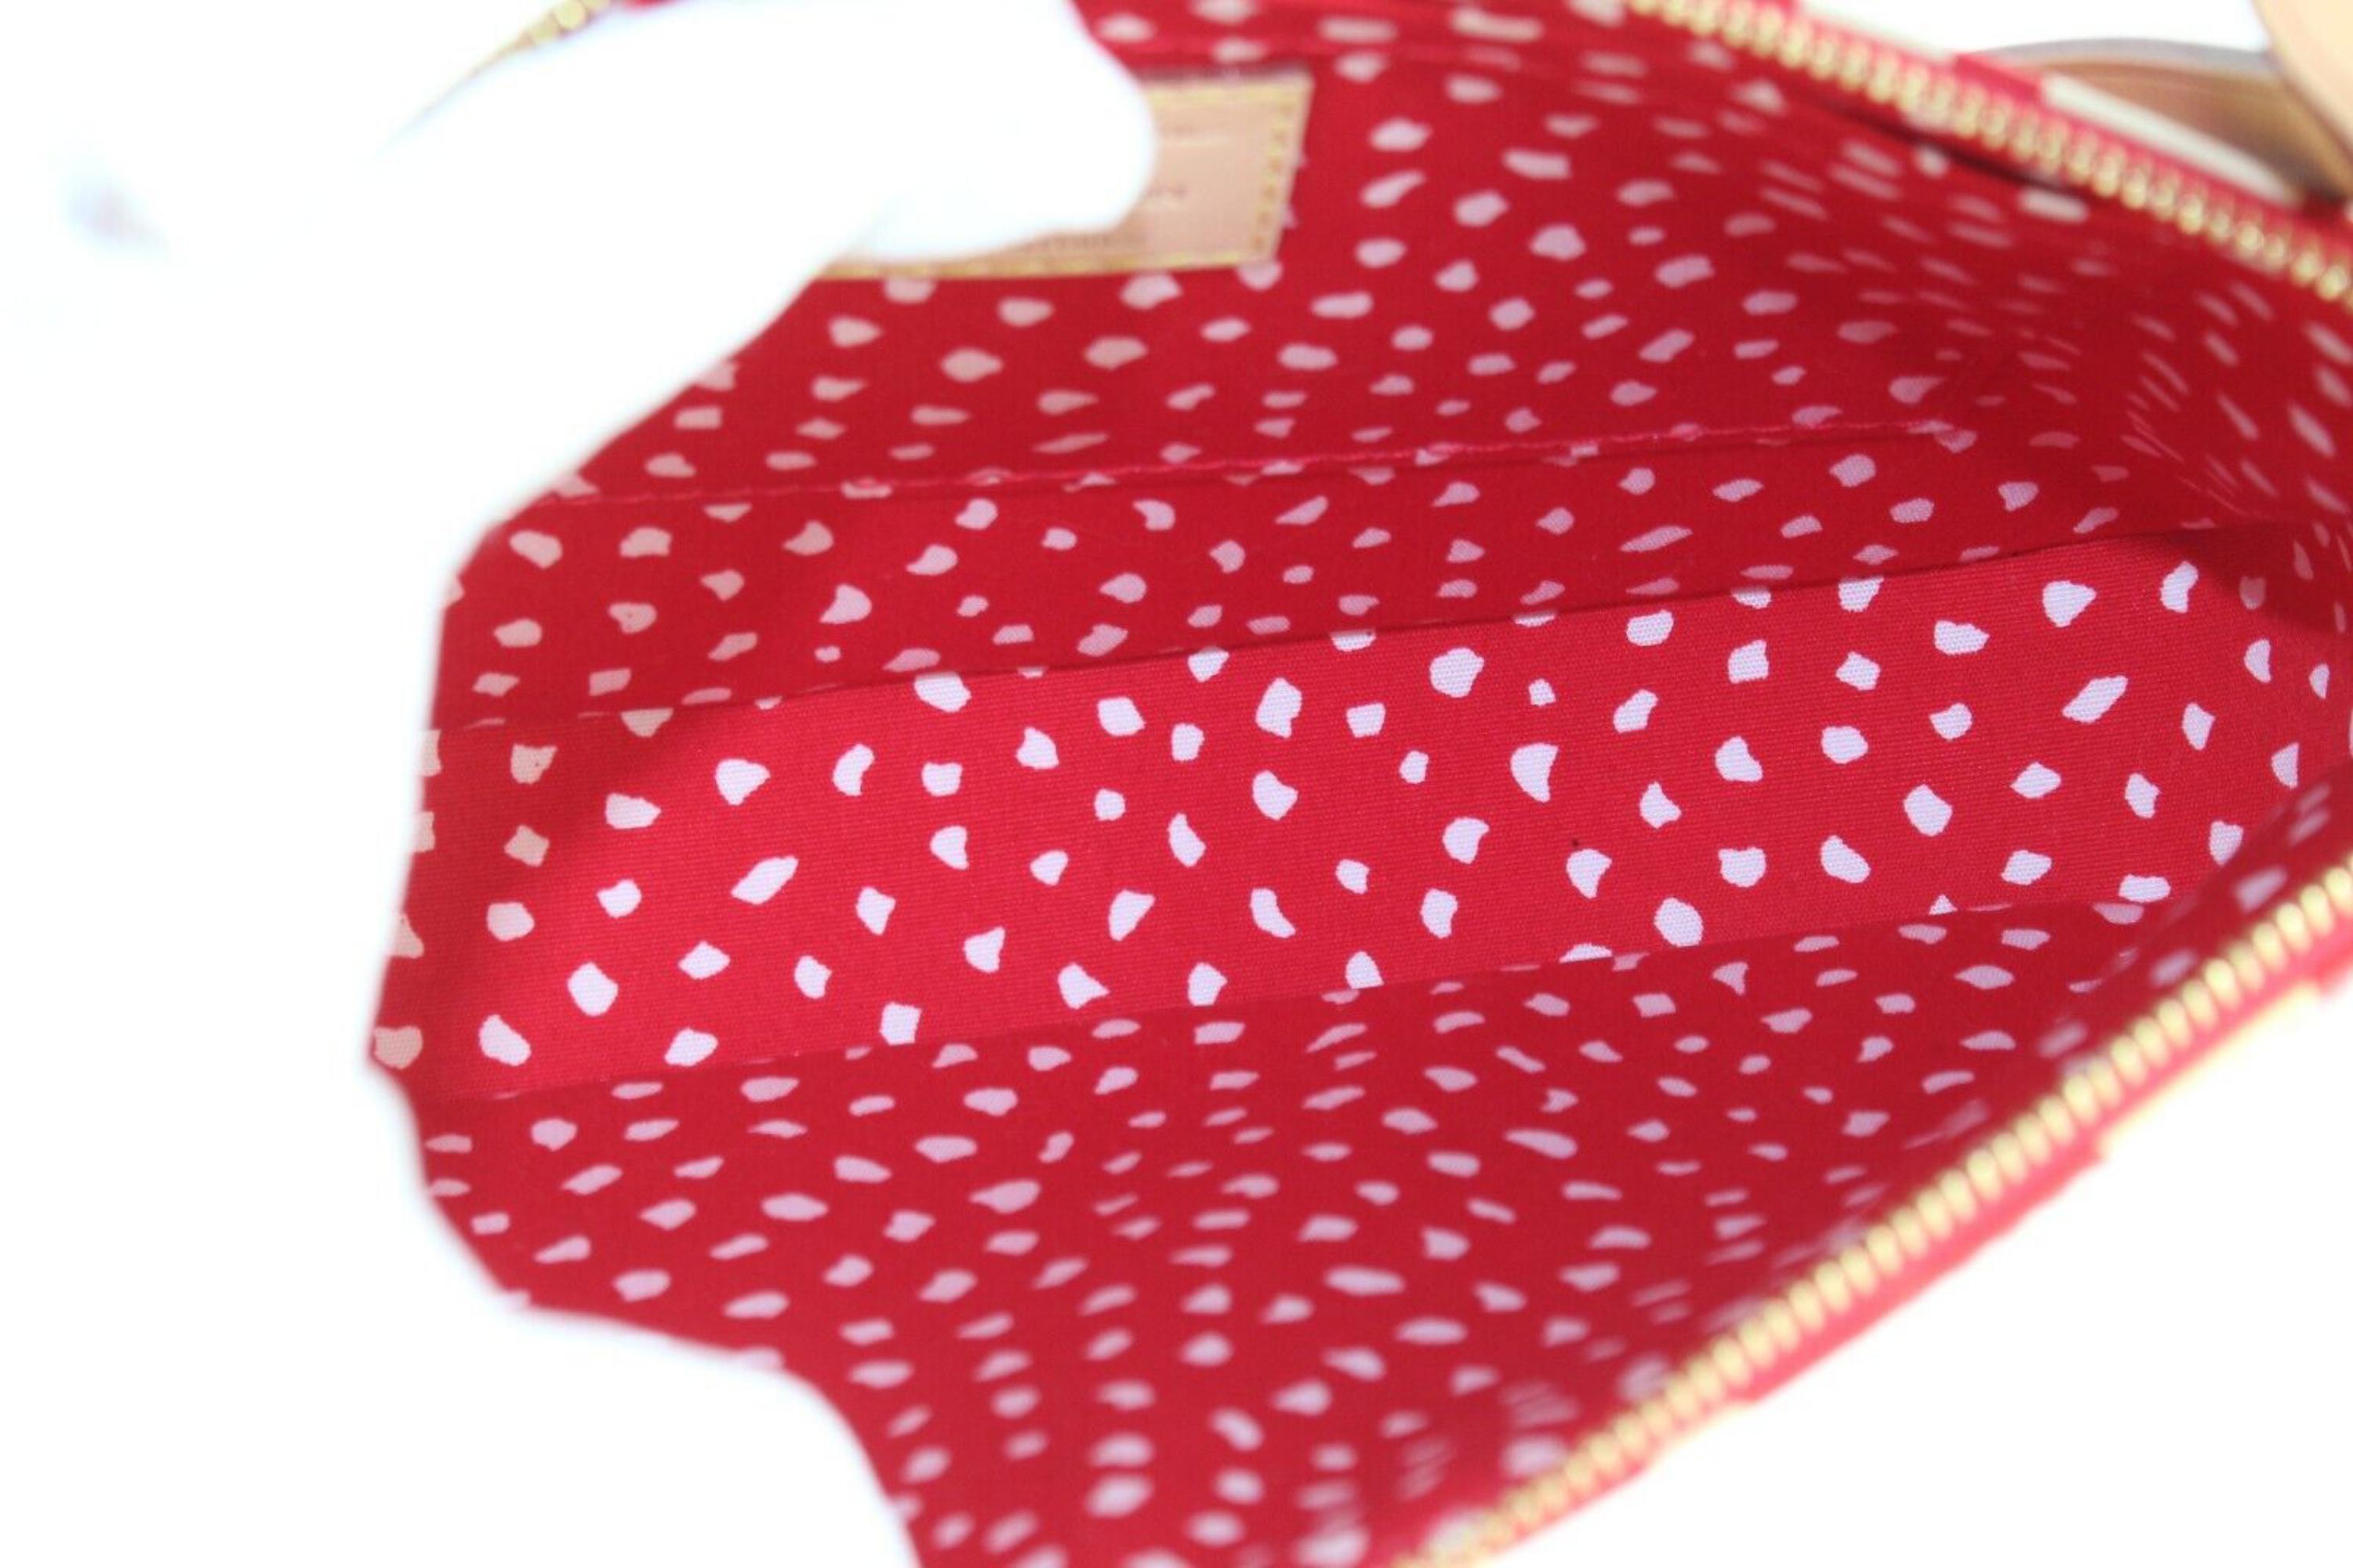 Louis Vuitton Kusama Infinity Red Dots Vernis Pochette-Accessoires 4LVJ0406 im Zustand „Gut“ in Dix hills, NY